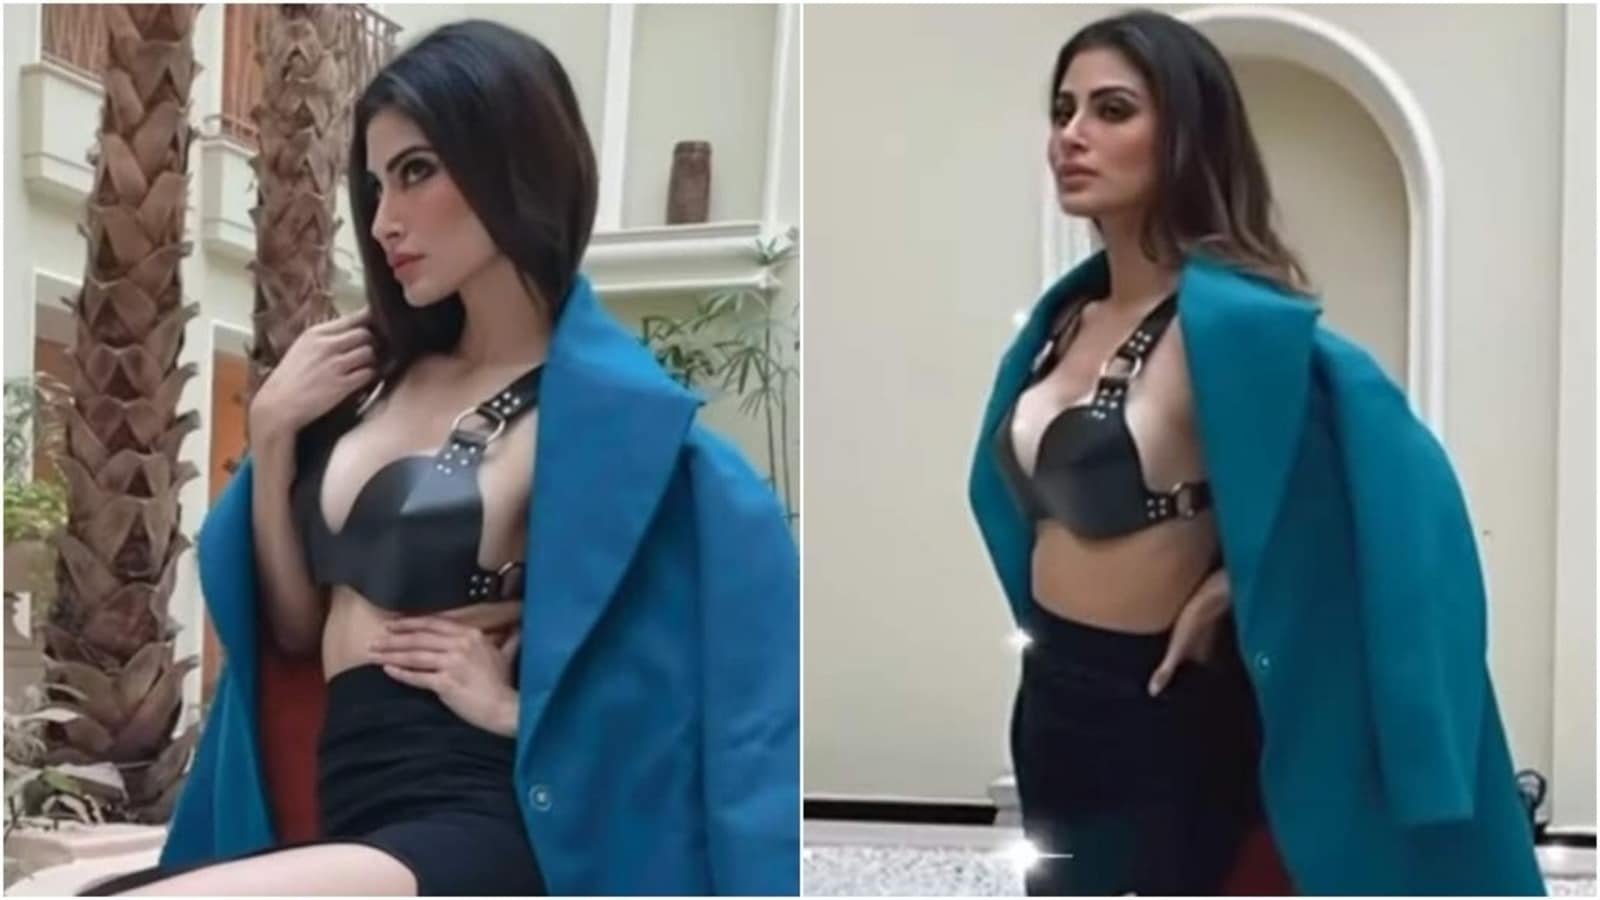 Mouni Roy Xnxx - Mouni Roy is sensational in leather bralette and thigh-slit skirt in BTS  video from shoot | Fashion Trends - Hindustan Times